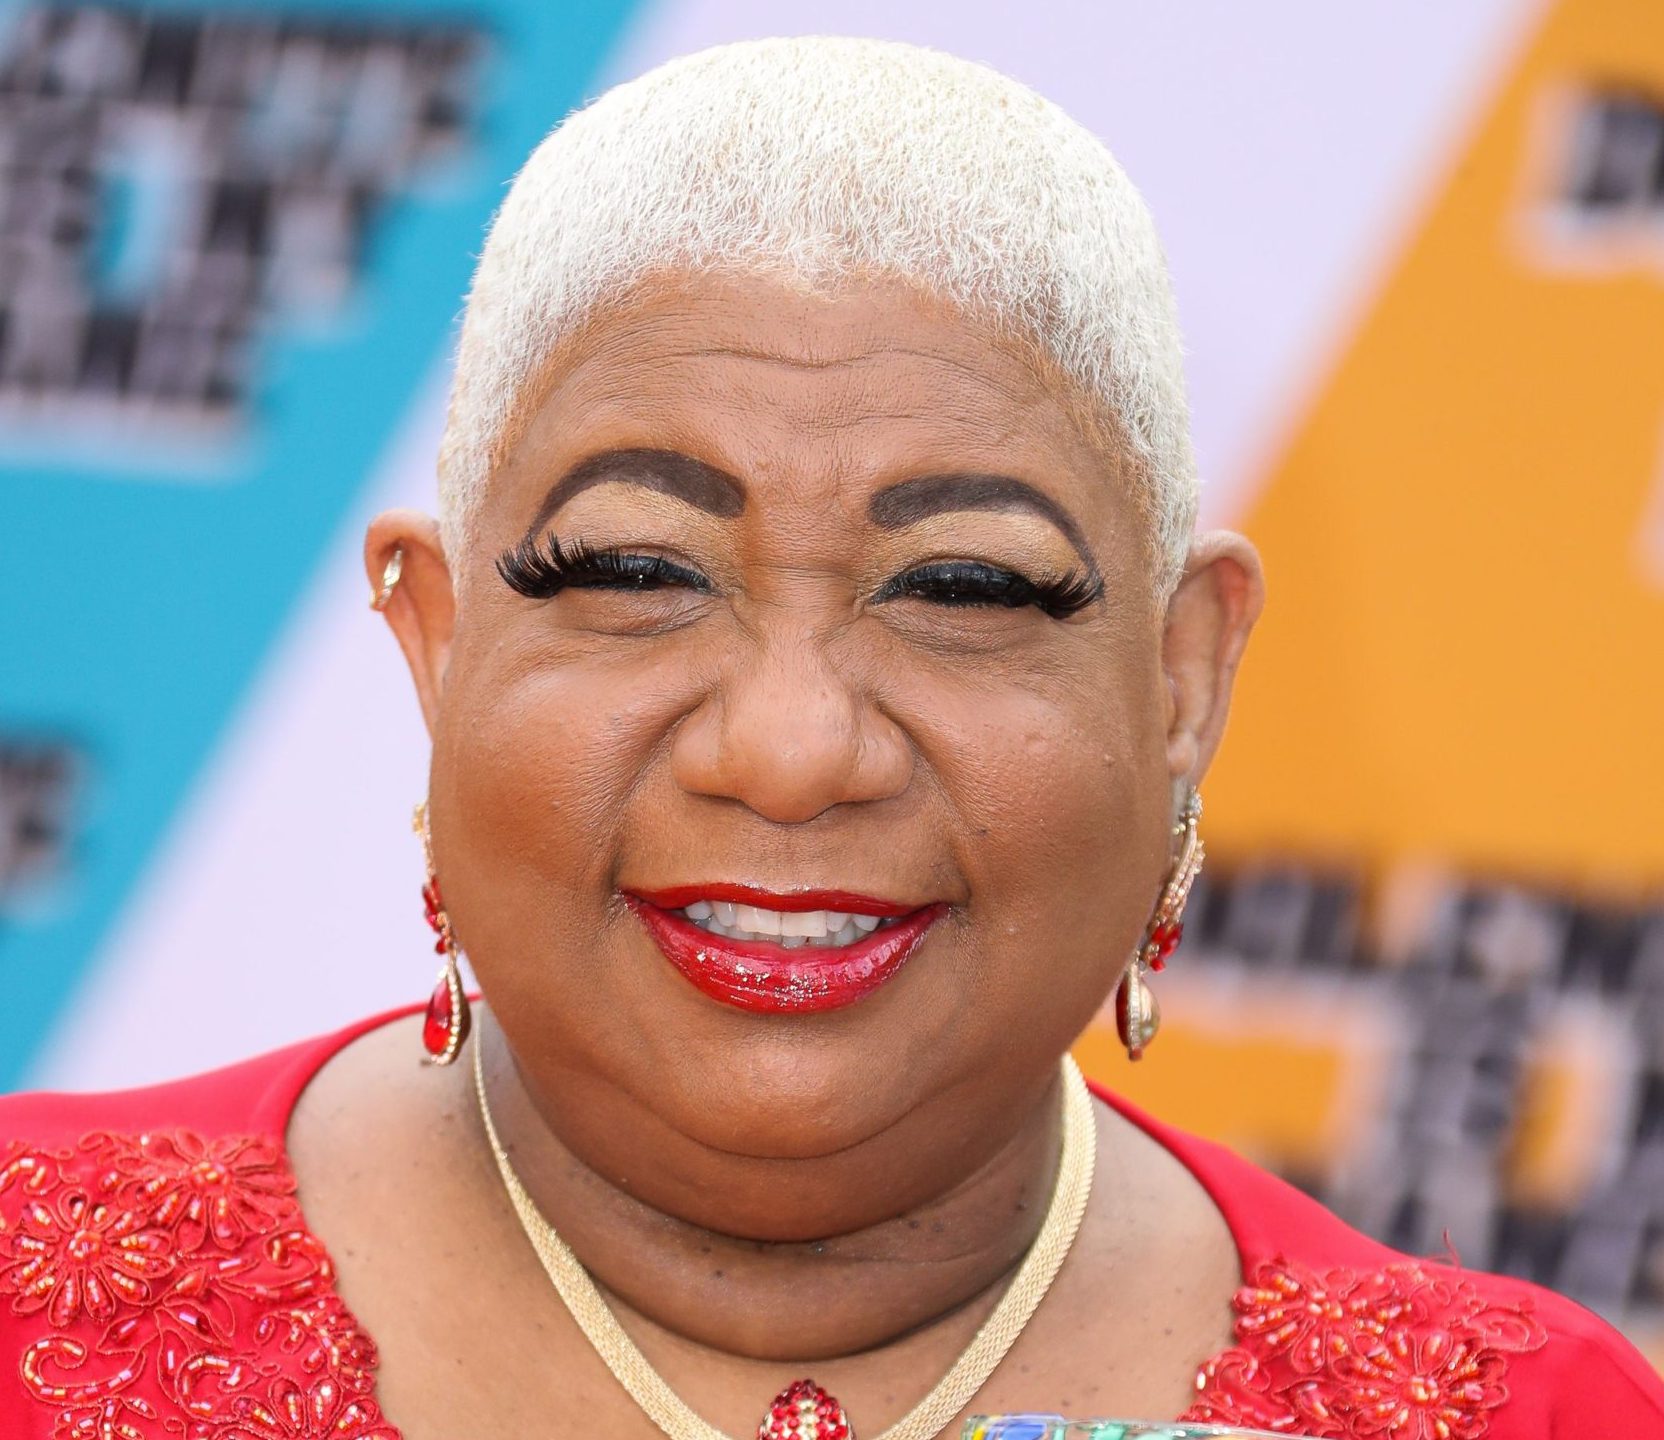 Luenell Reveals That She Went to Jail For Robbing a Bank Before Becoming a Famous Comedian